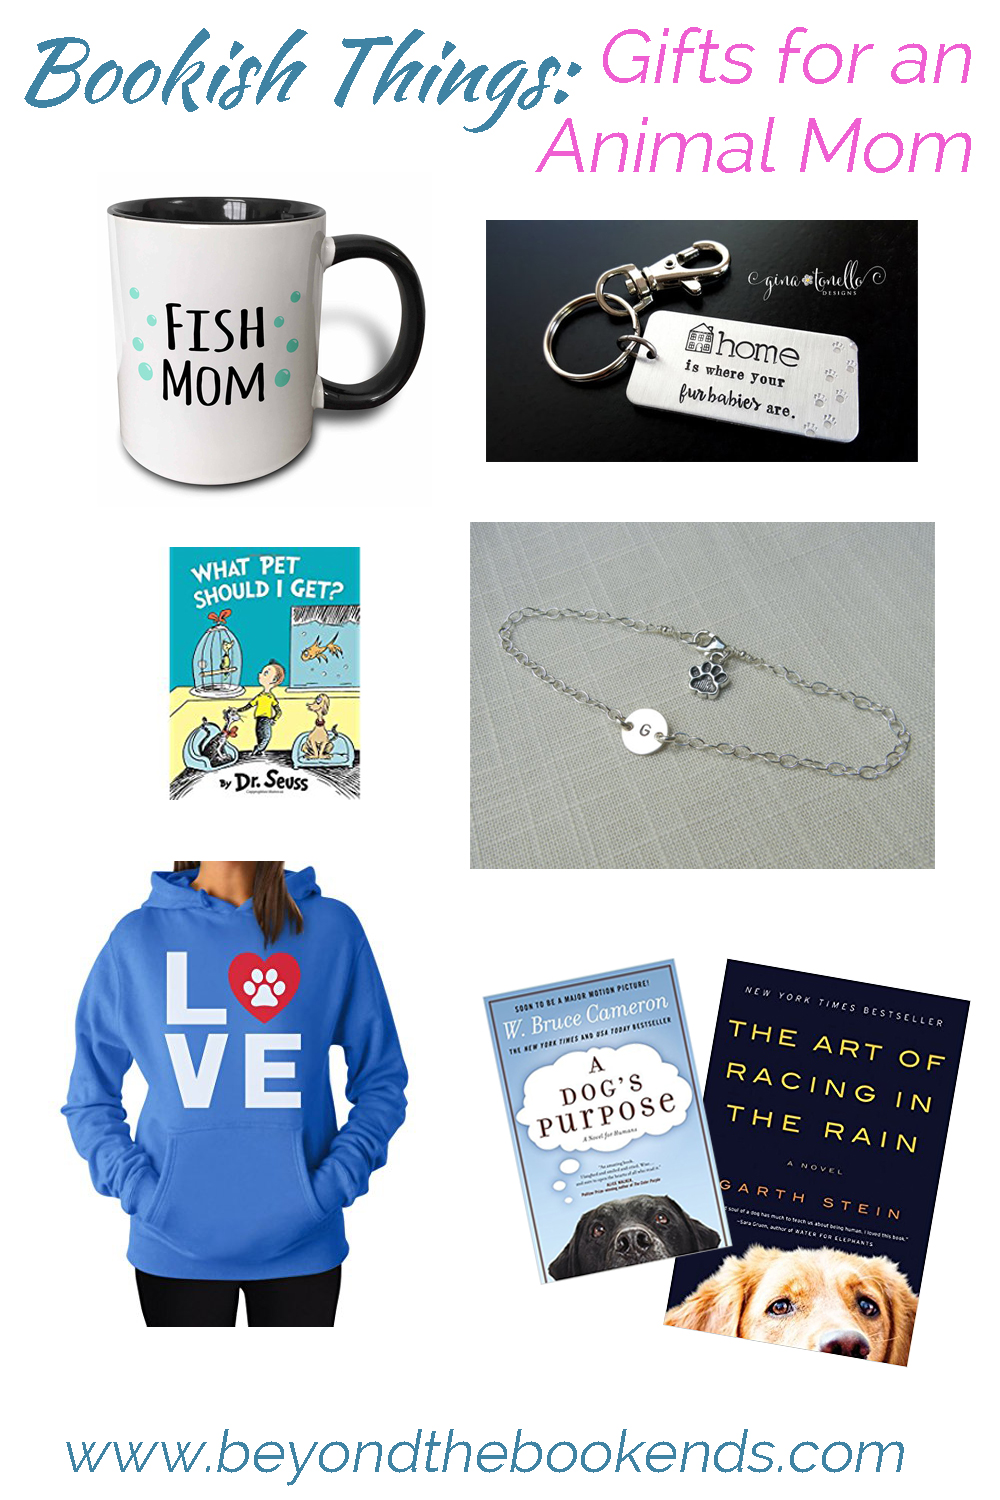 Gift Guide for Animal Moms and 6 other mom types